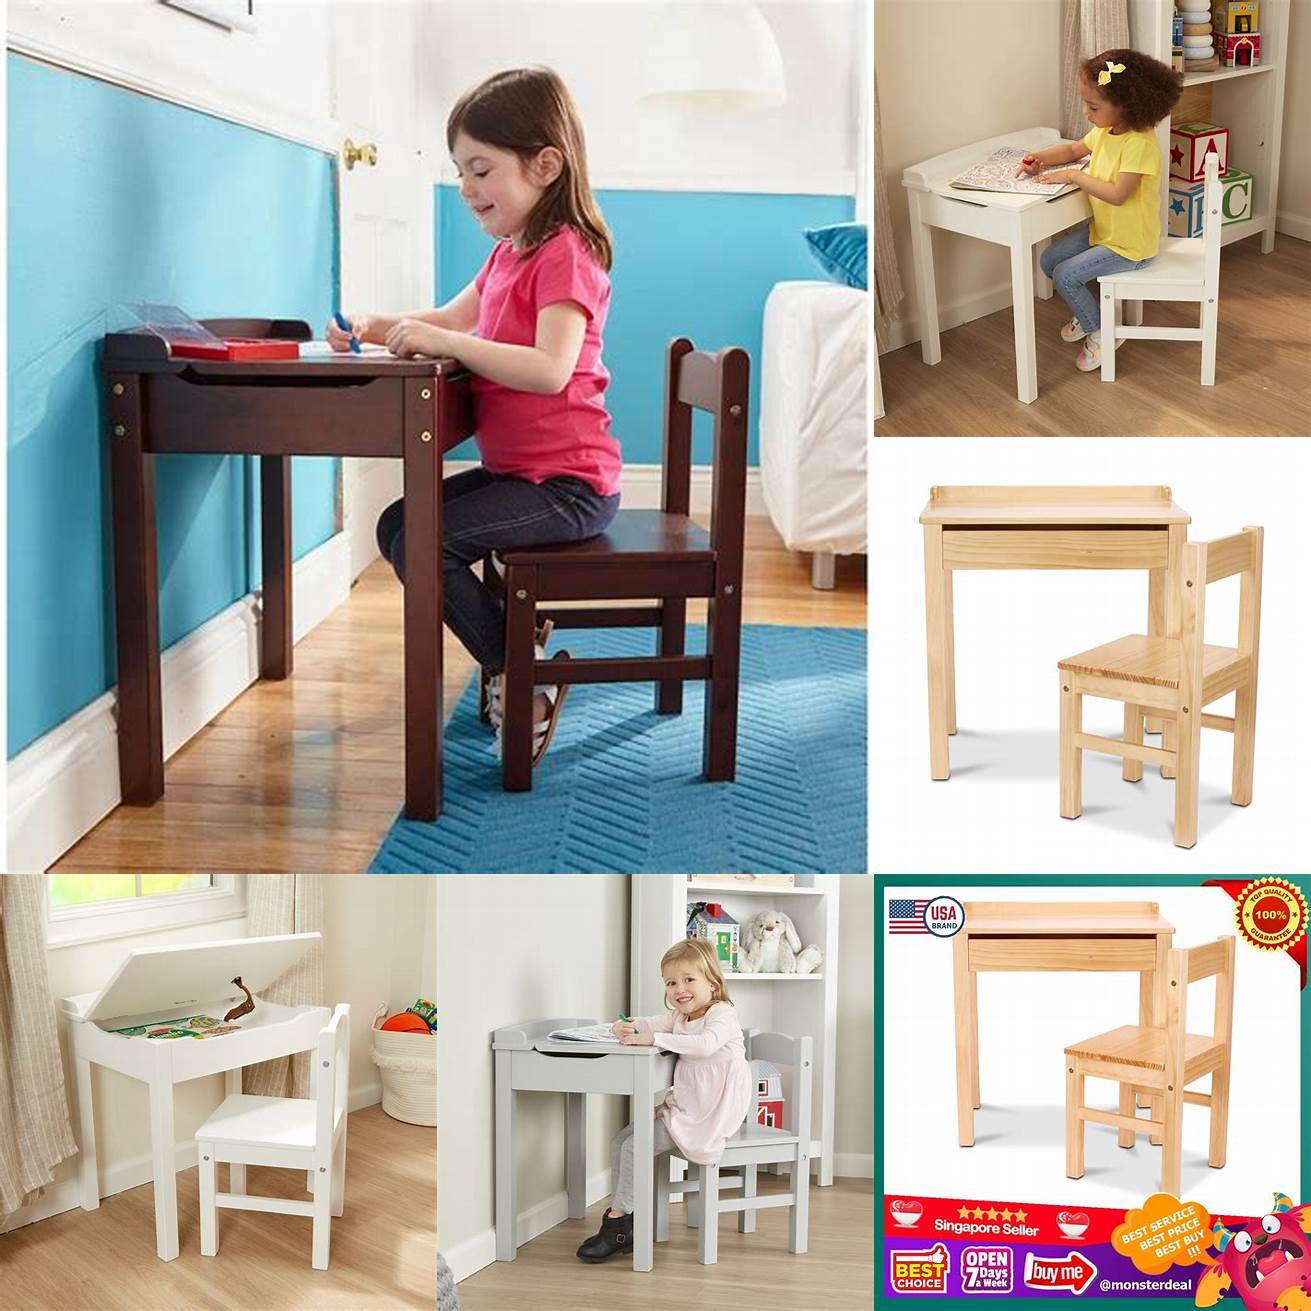 The Melissa Doug Childs Lift-Top Desk Chair is a great option for kids who need a workspace Its made from sturdy wood and has a lift-top desk that provides ample storage space